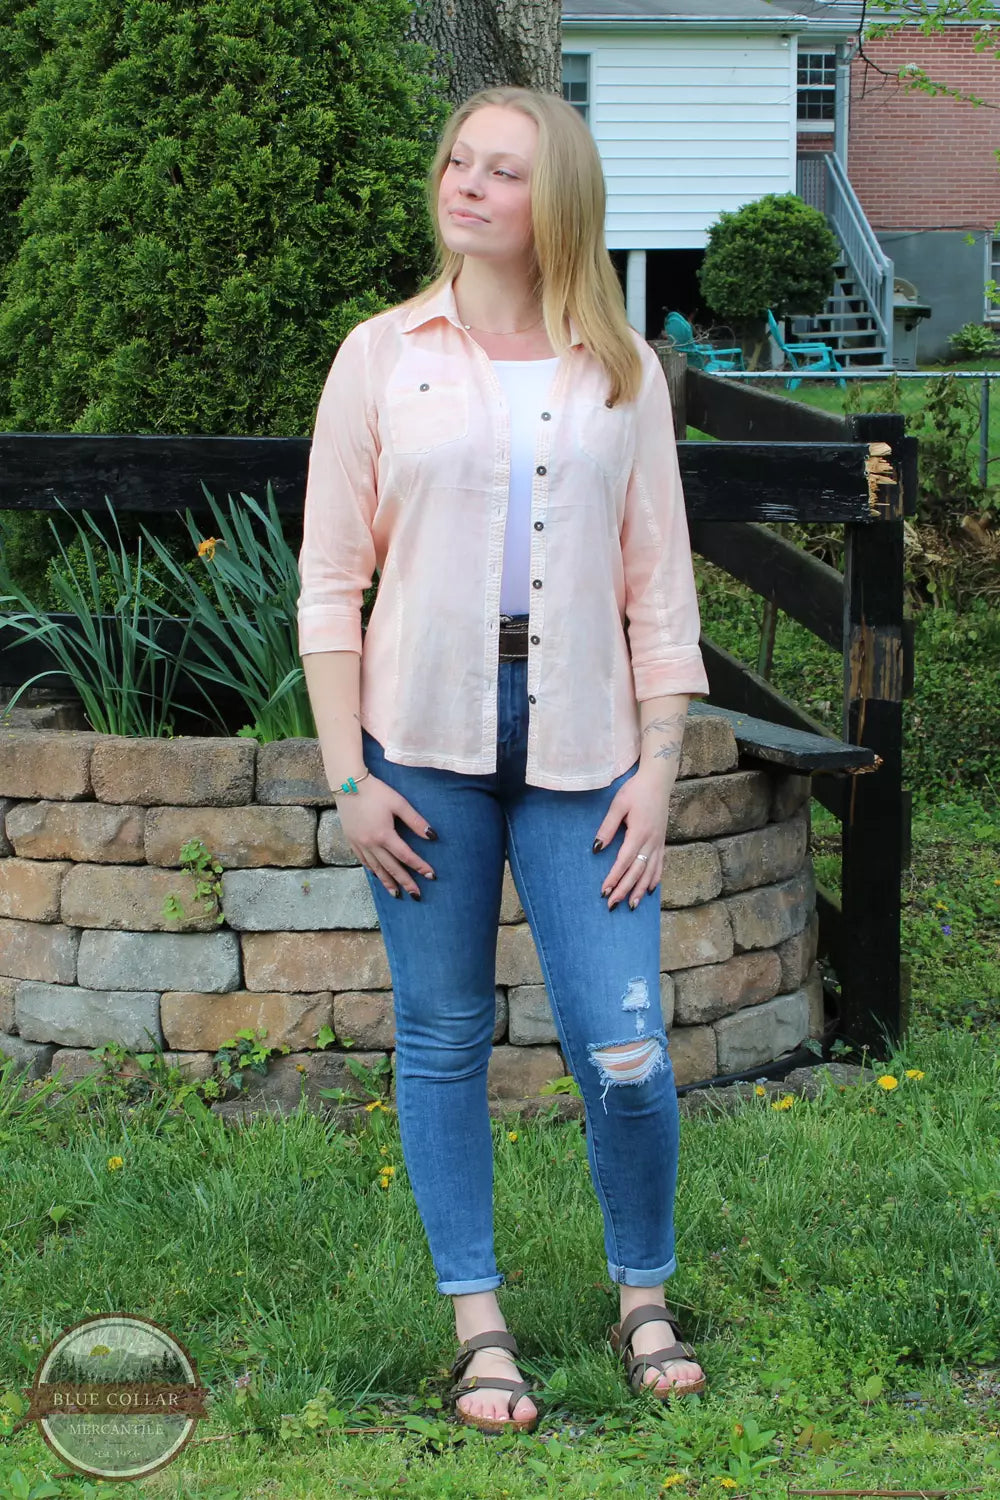 Keren Hart 76020 Faded Wash 3/4 Sleeve Shirt Peach Front View. Available in multiple colors